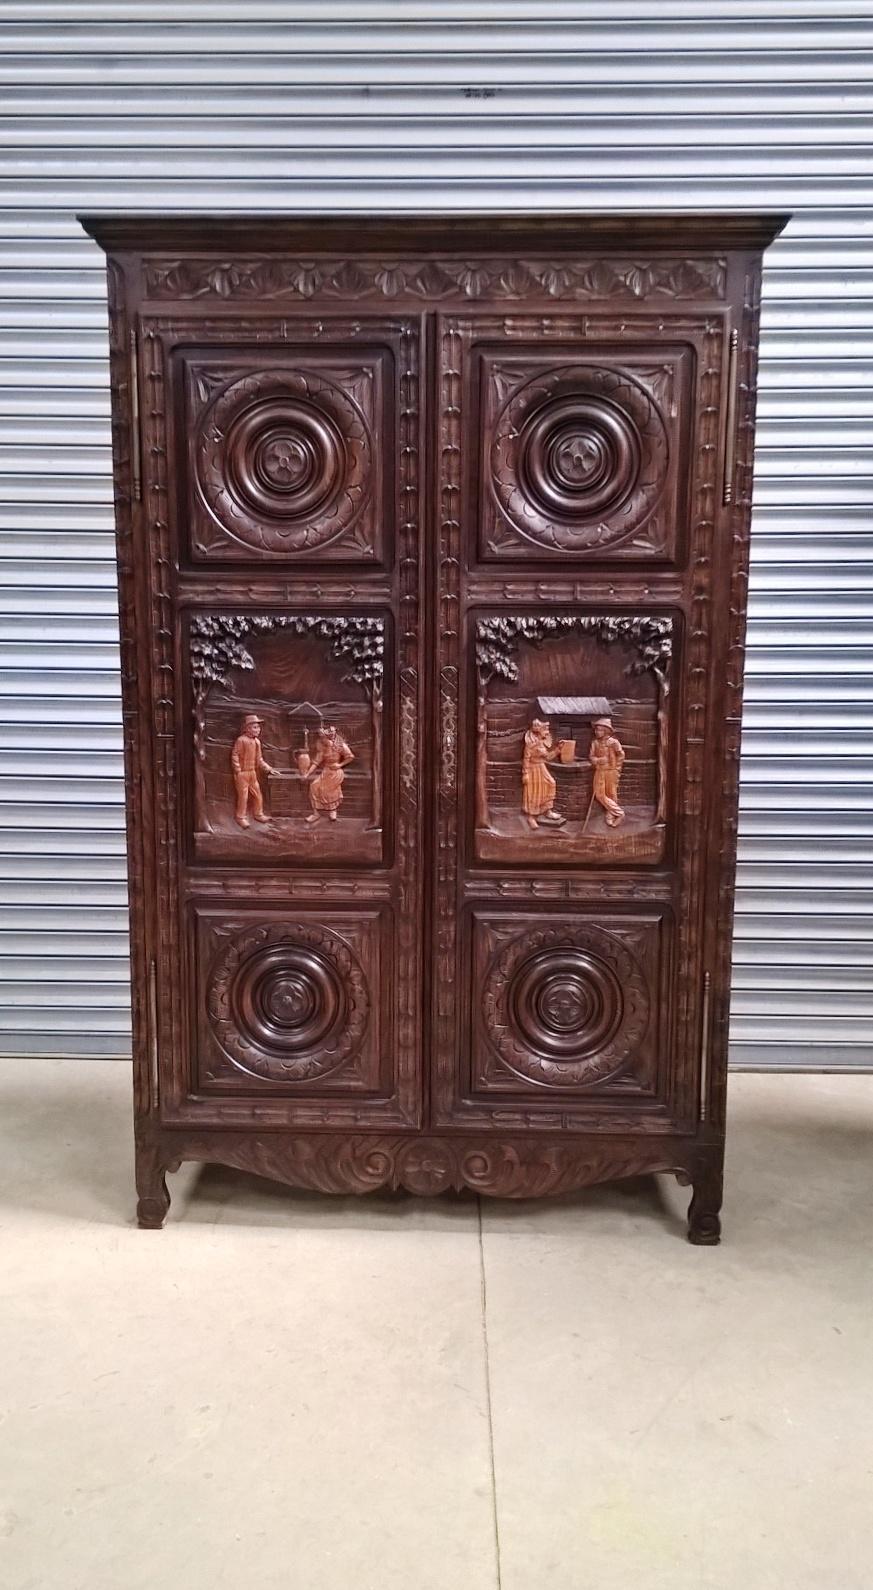 A French oak armoire originating from the region of Brittany.

The top with a stepped pediment and a carved frieze of flowers within triangular frames below.

The pair of doors each with three panels, two being of circular design and the central